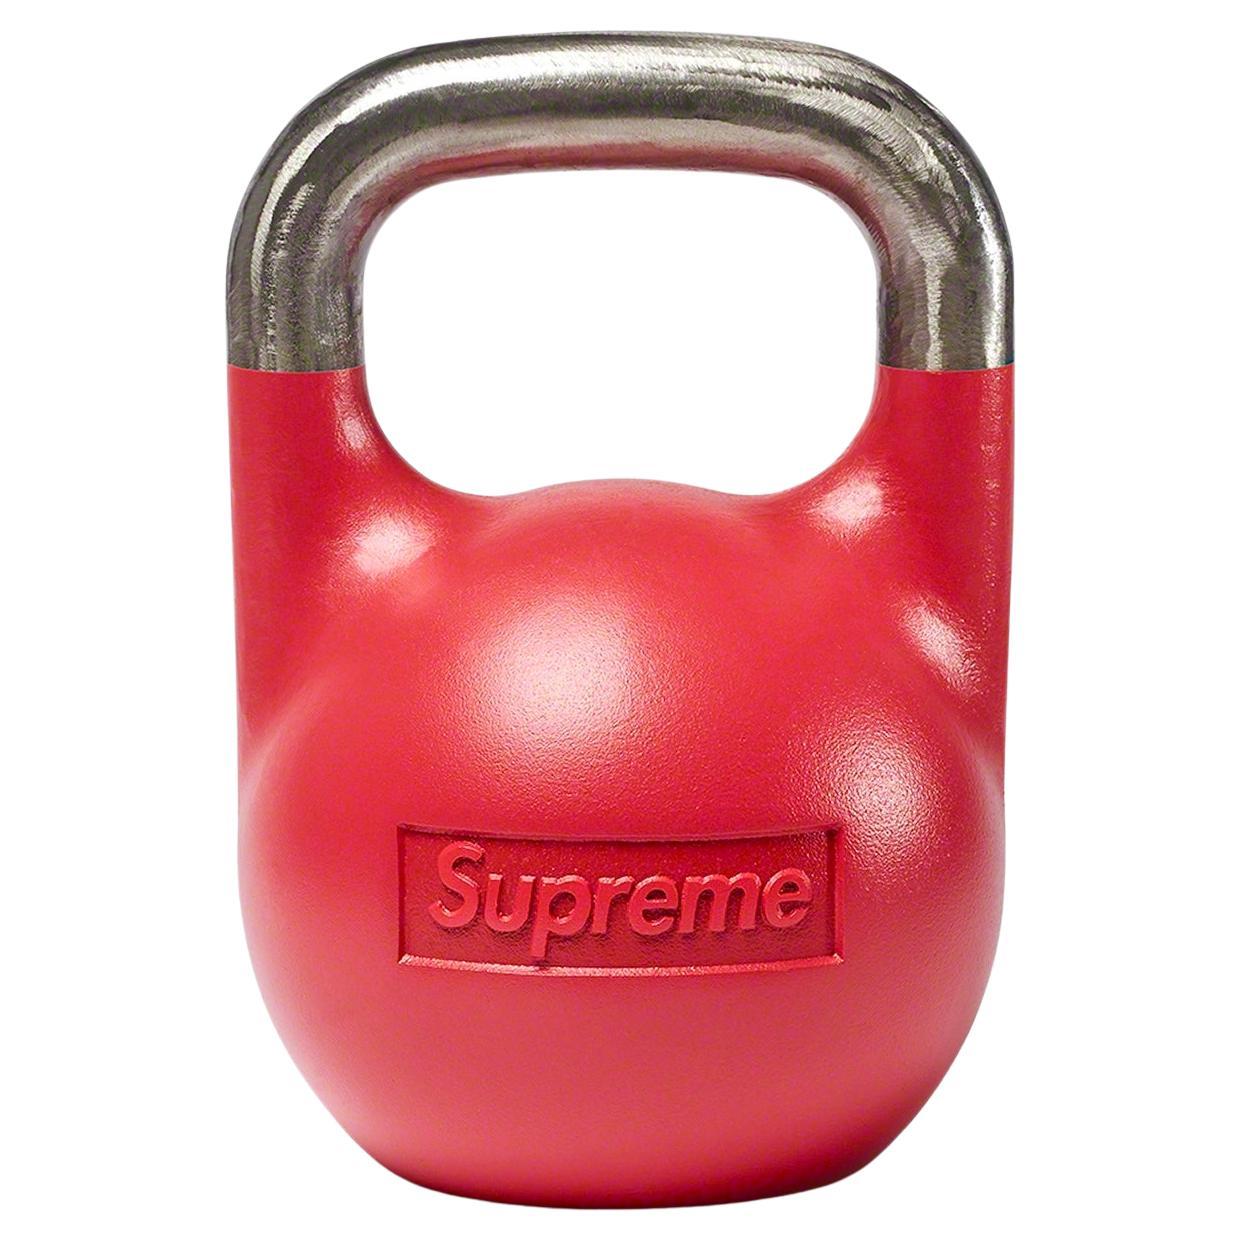 Supreme x Tru Grit Red Kettlebell Six KG Weight, New in Box, Fall 2022